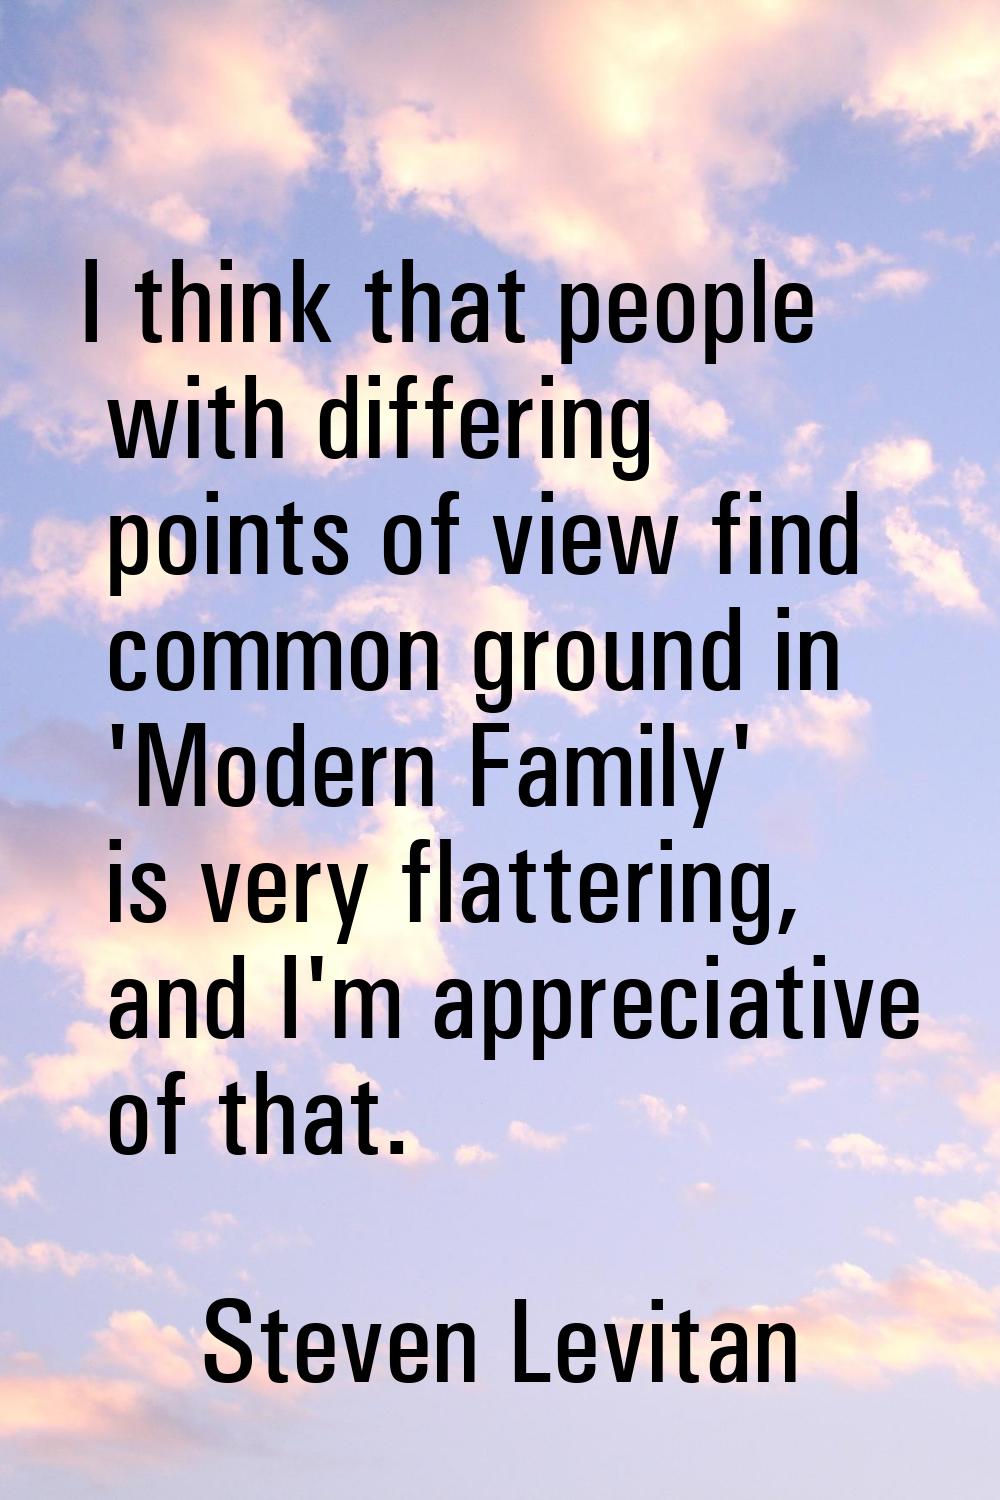 I think that people with differing points of view find common ground in 'Modern Family' is very fla